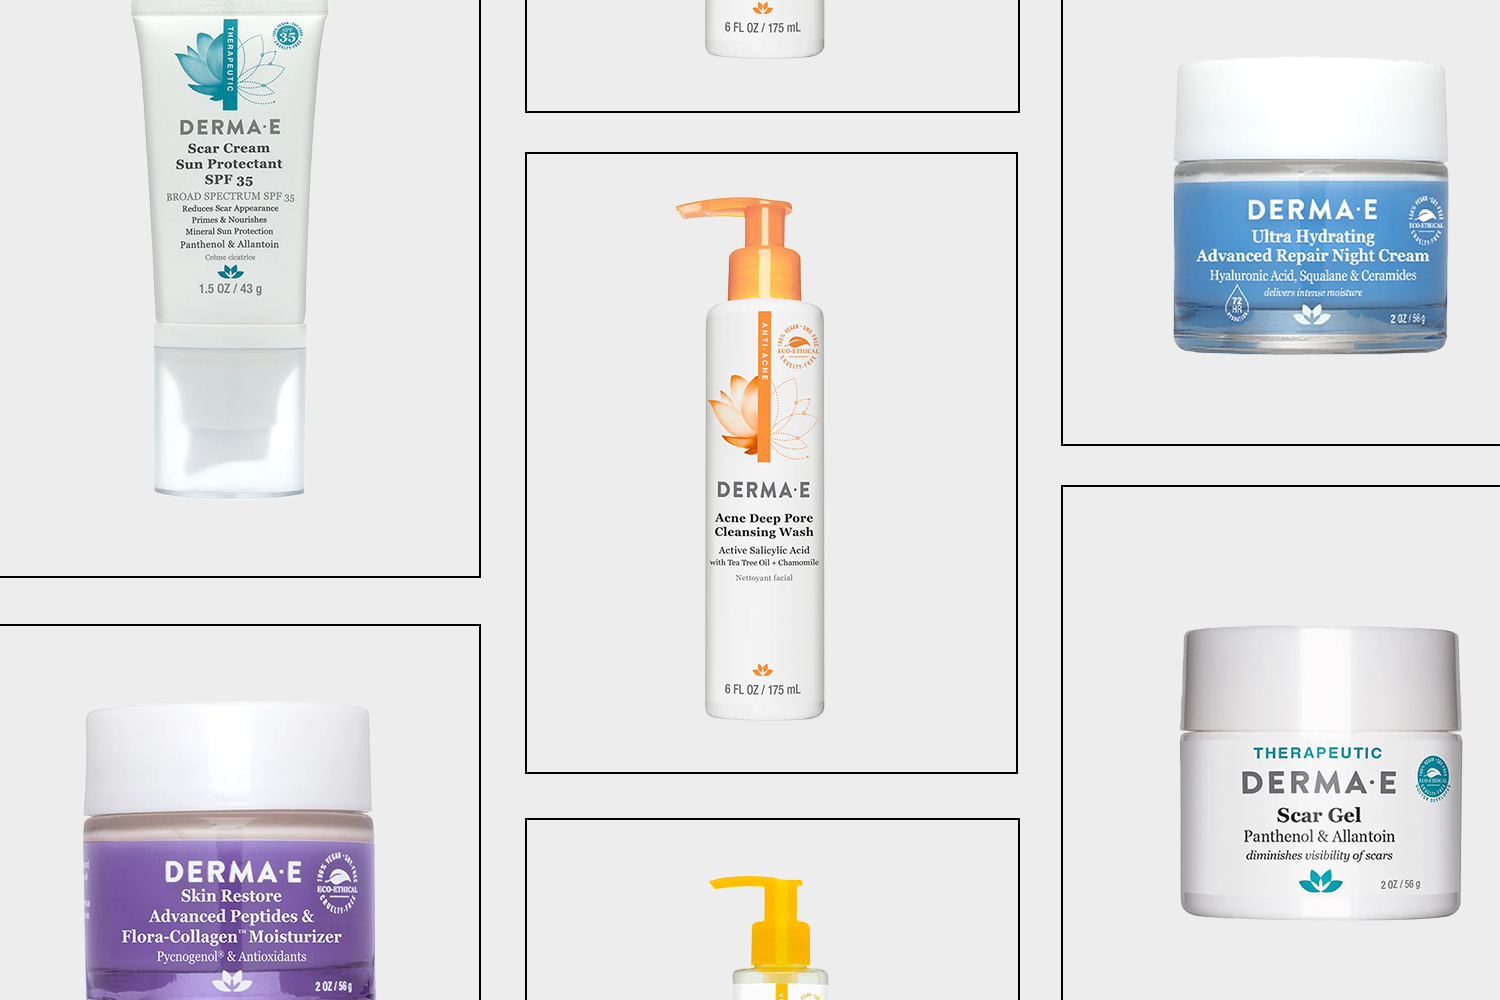 Skincare Brand Derma E Is Having a Huge Fourth of July Sale